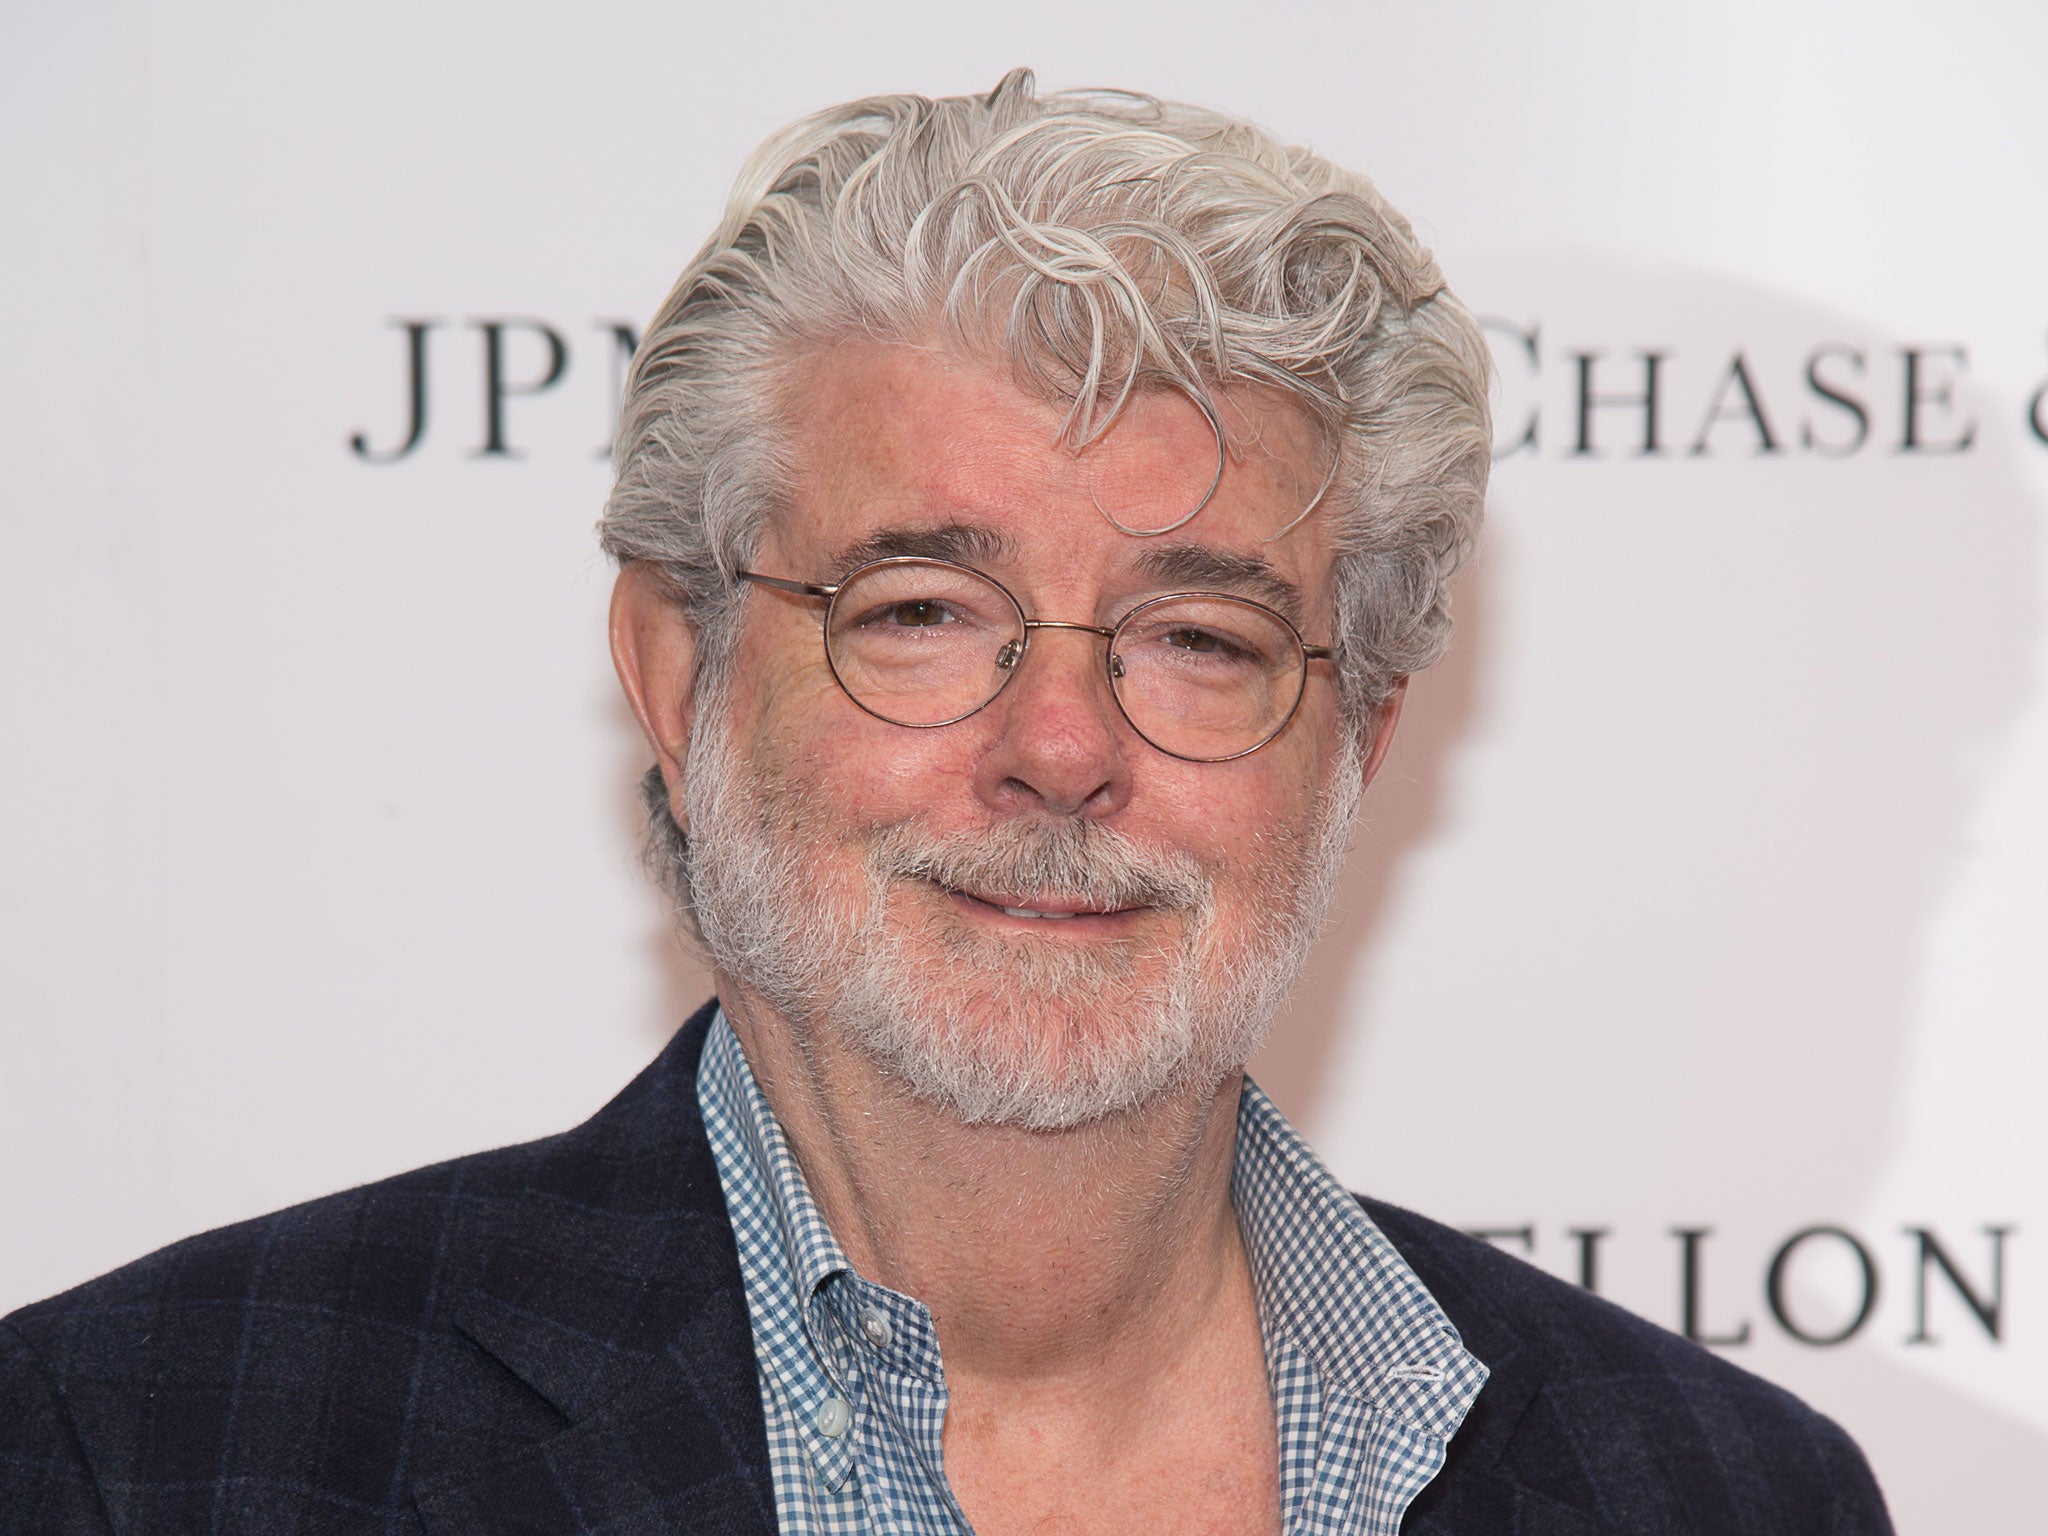 George Lucas said he was "humbled"